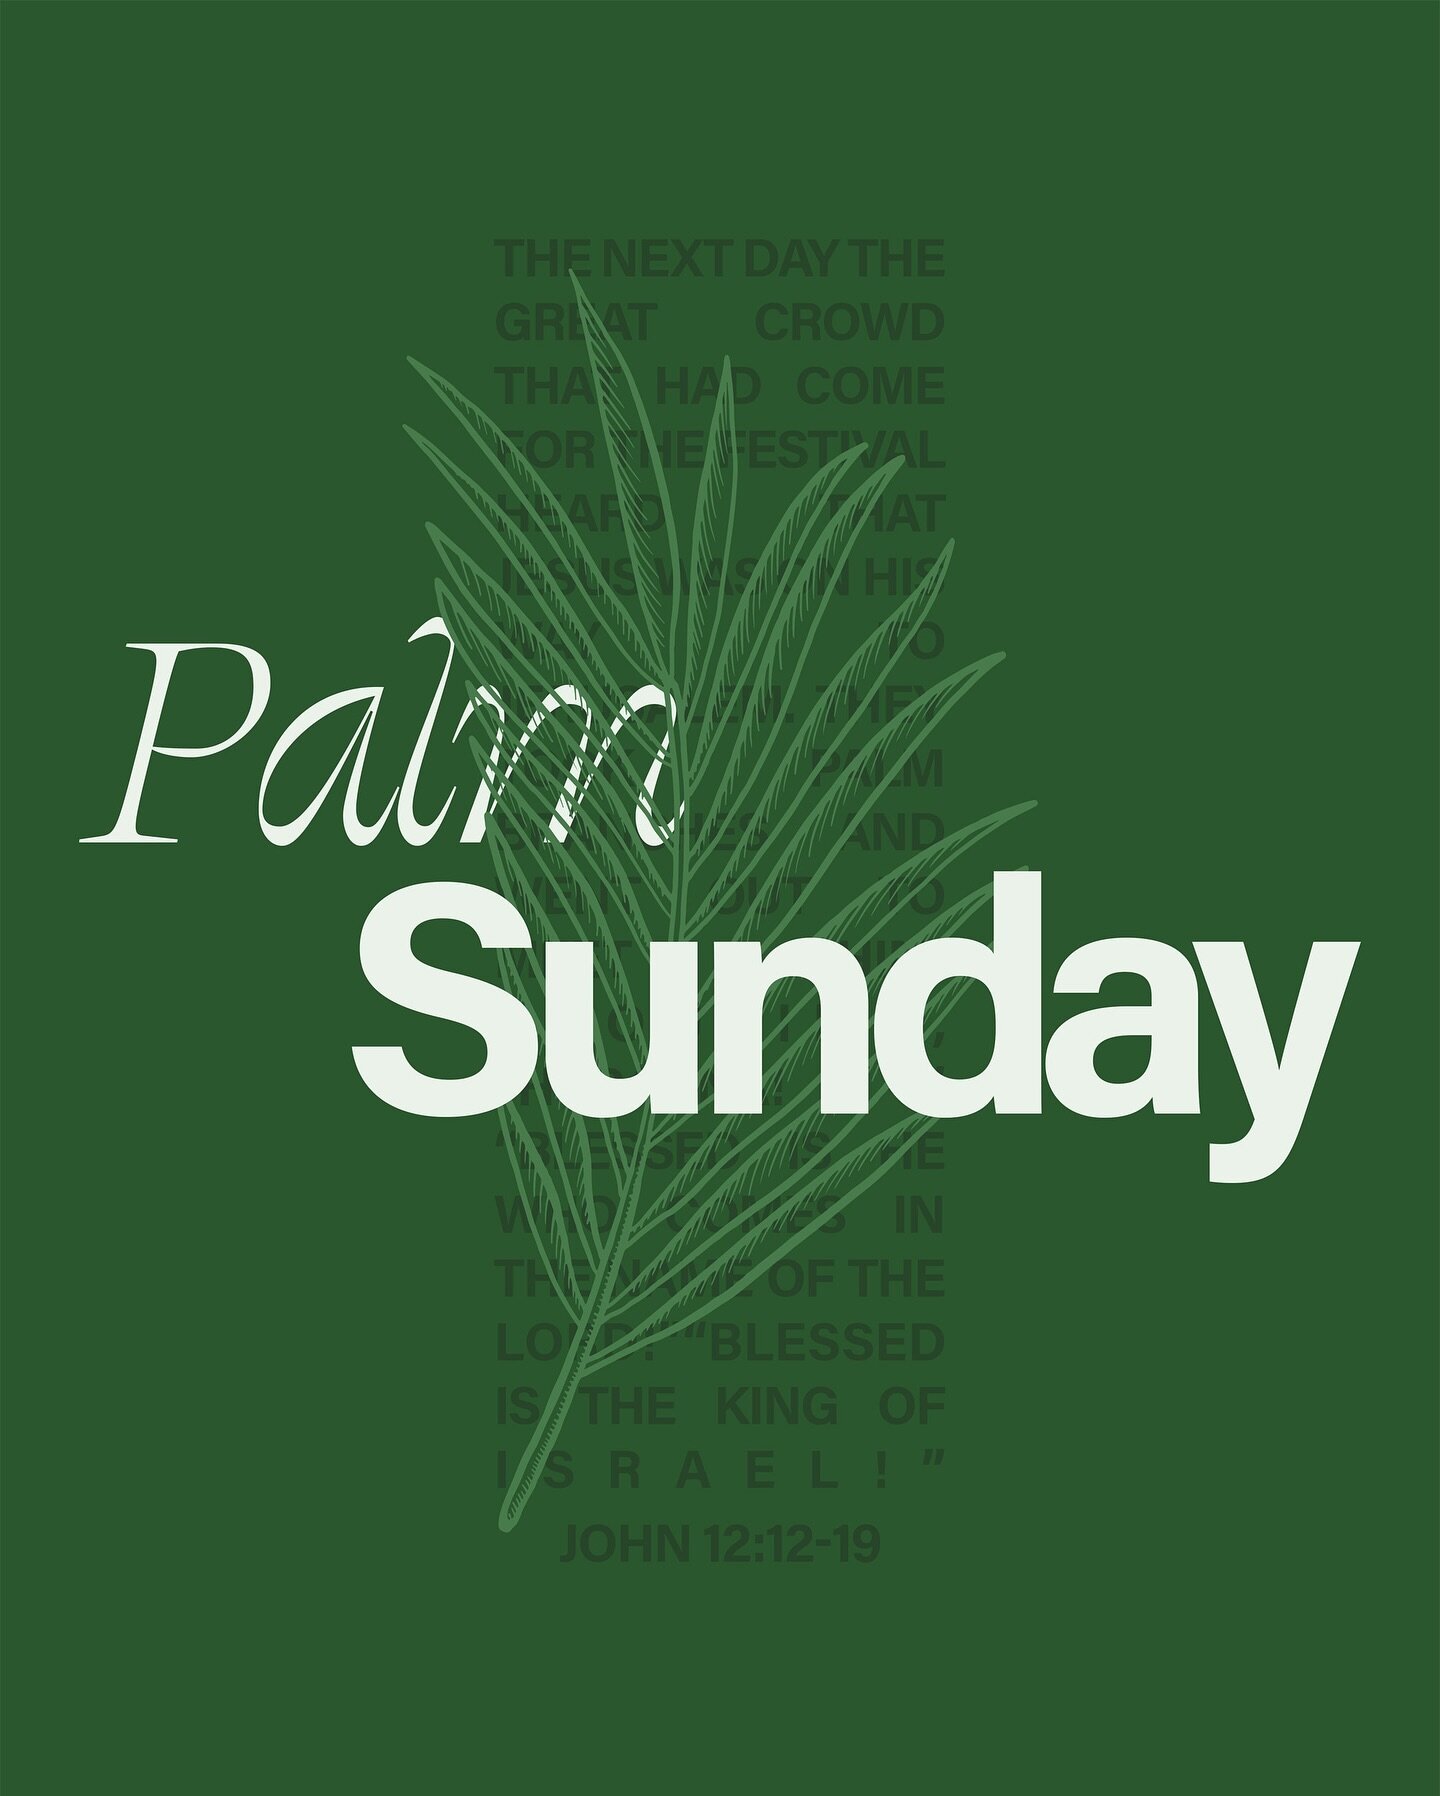 &rdquo;So they took branches of palm trees and went out to meet him, crying out, &ldquo;Hosanna! Blessed is he who comes in the name of the Lord, even the King of Israel!&rdquo;&ldquo;
‭‭John‬ ‭12‬:‭13‬ ‭ESV‬‬
https://bible.com/bible/59/jhn.12.13.ESV